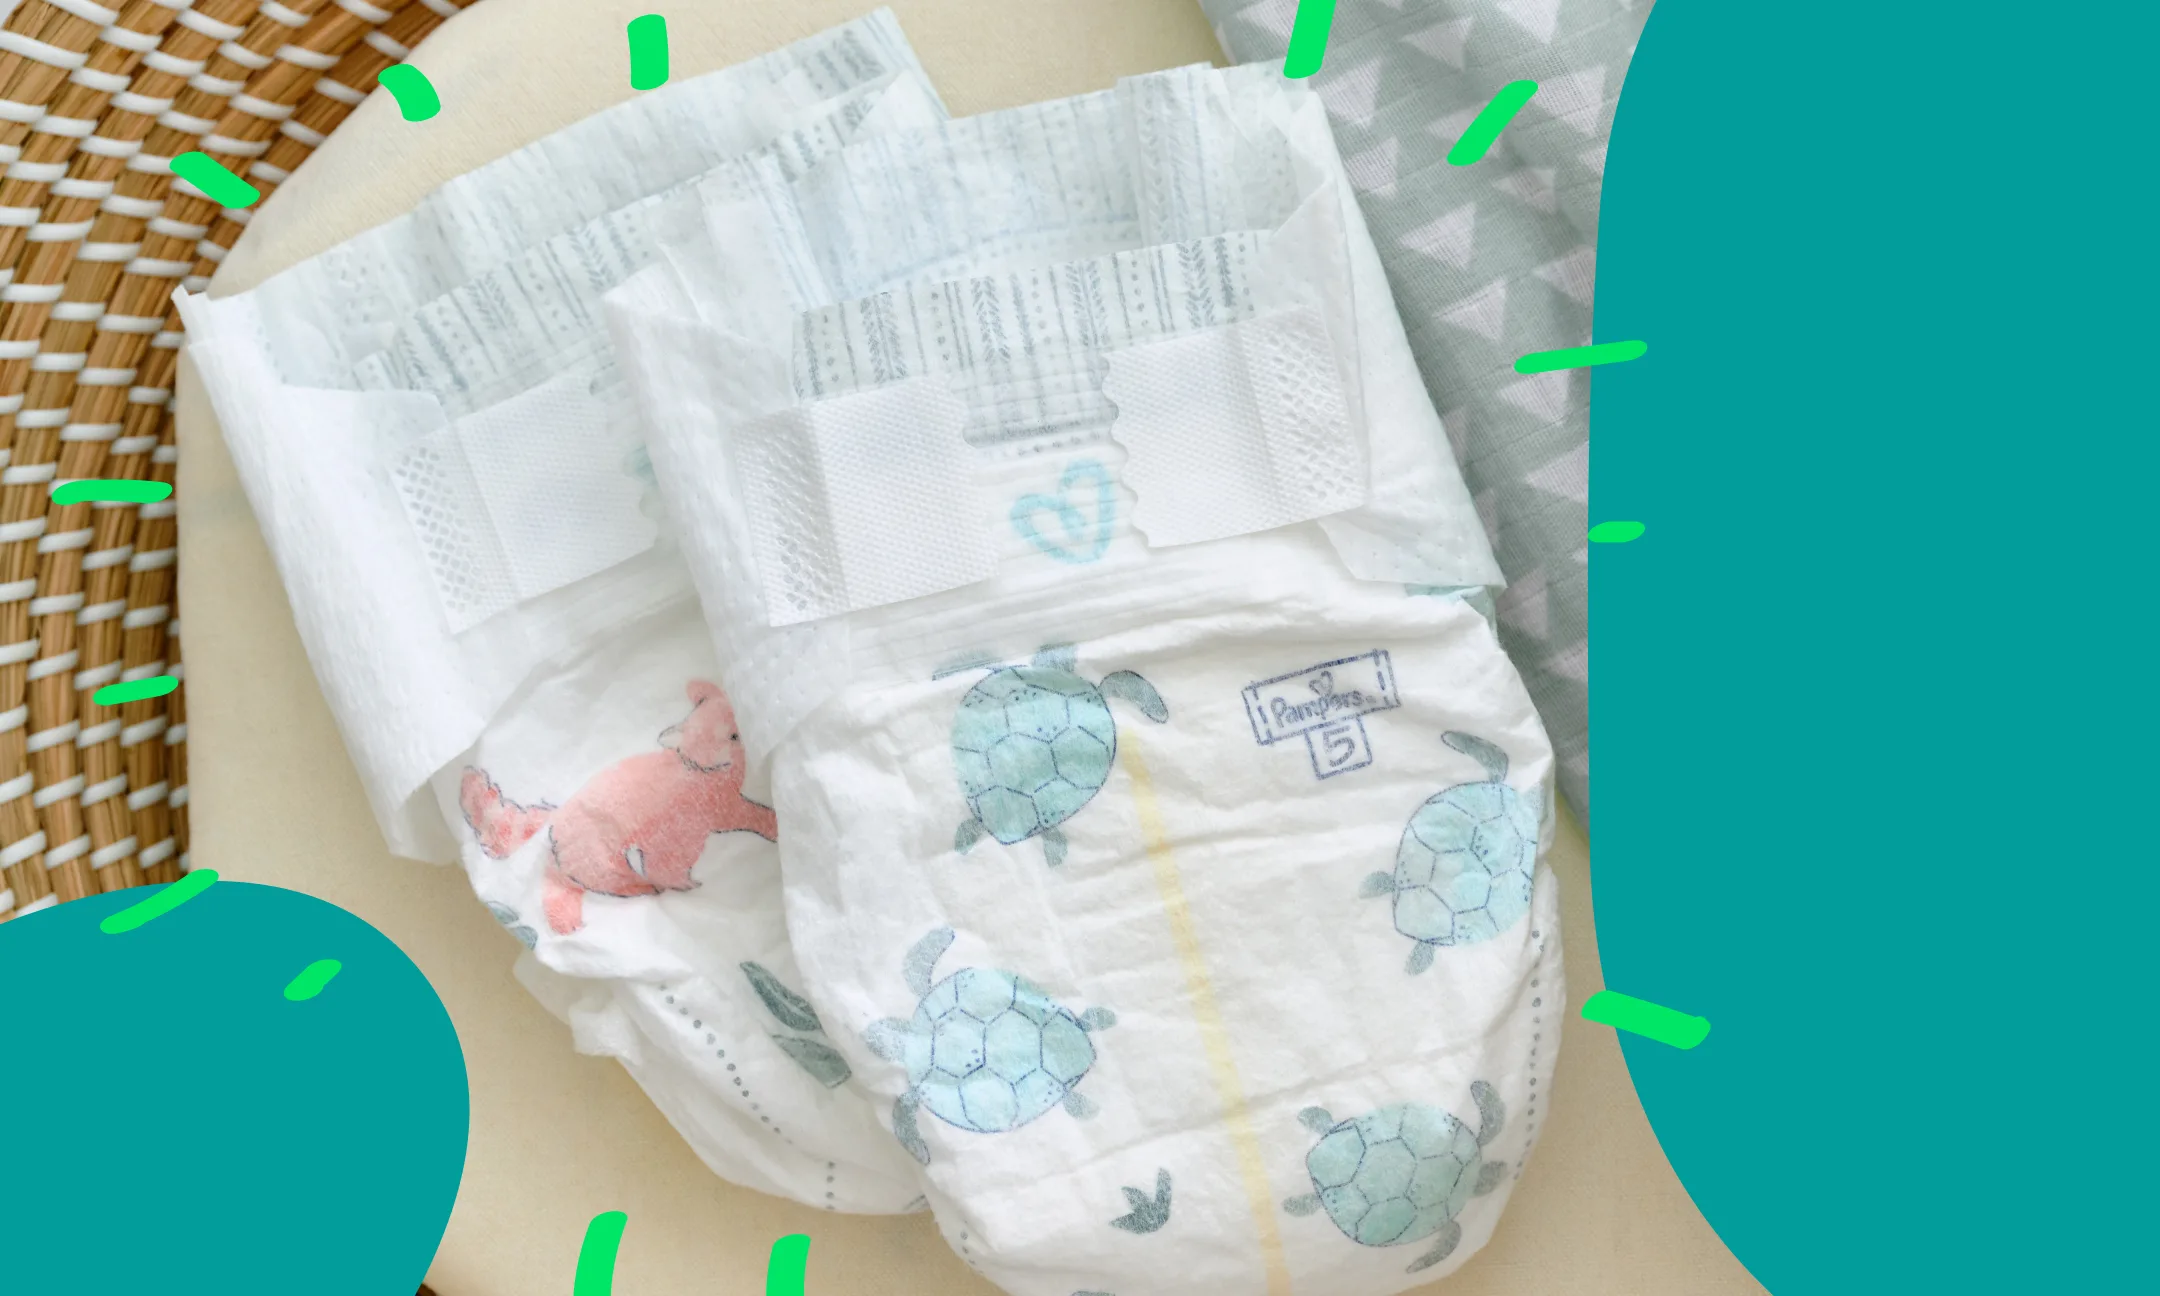 Pampers diapers made in USA